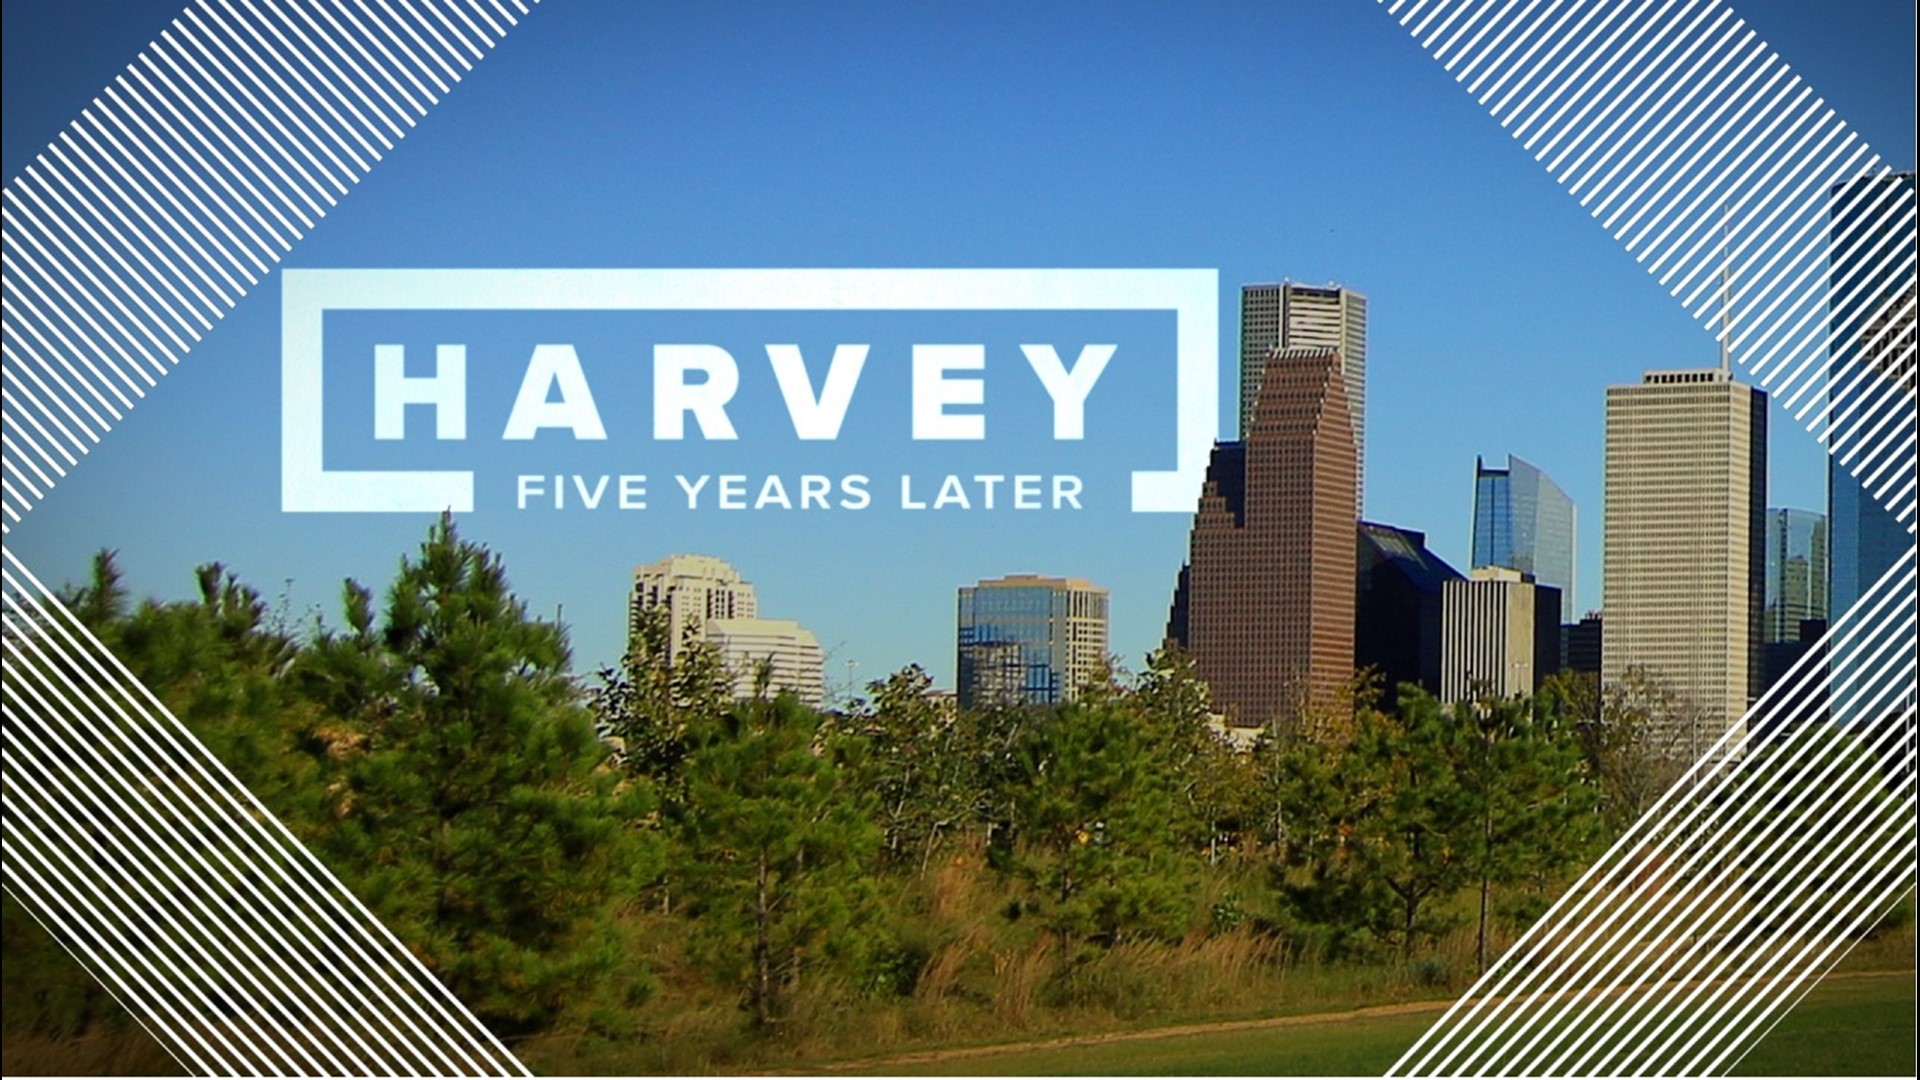 Five years since Harvey hit Houston and caused widespread flooding, the damage done isn't completely repaired, but progress has been made.